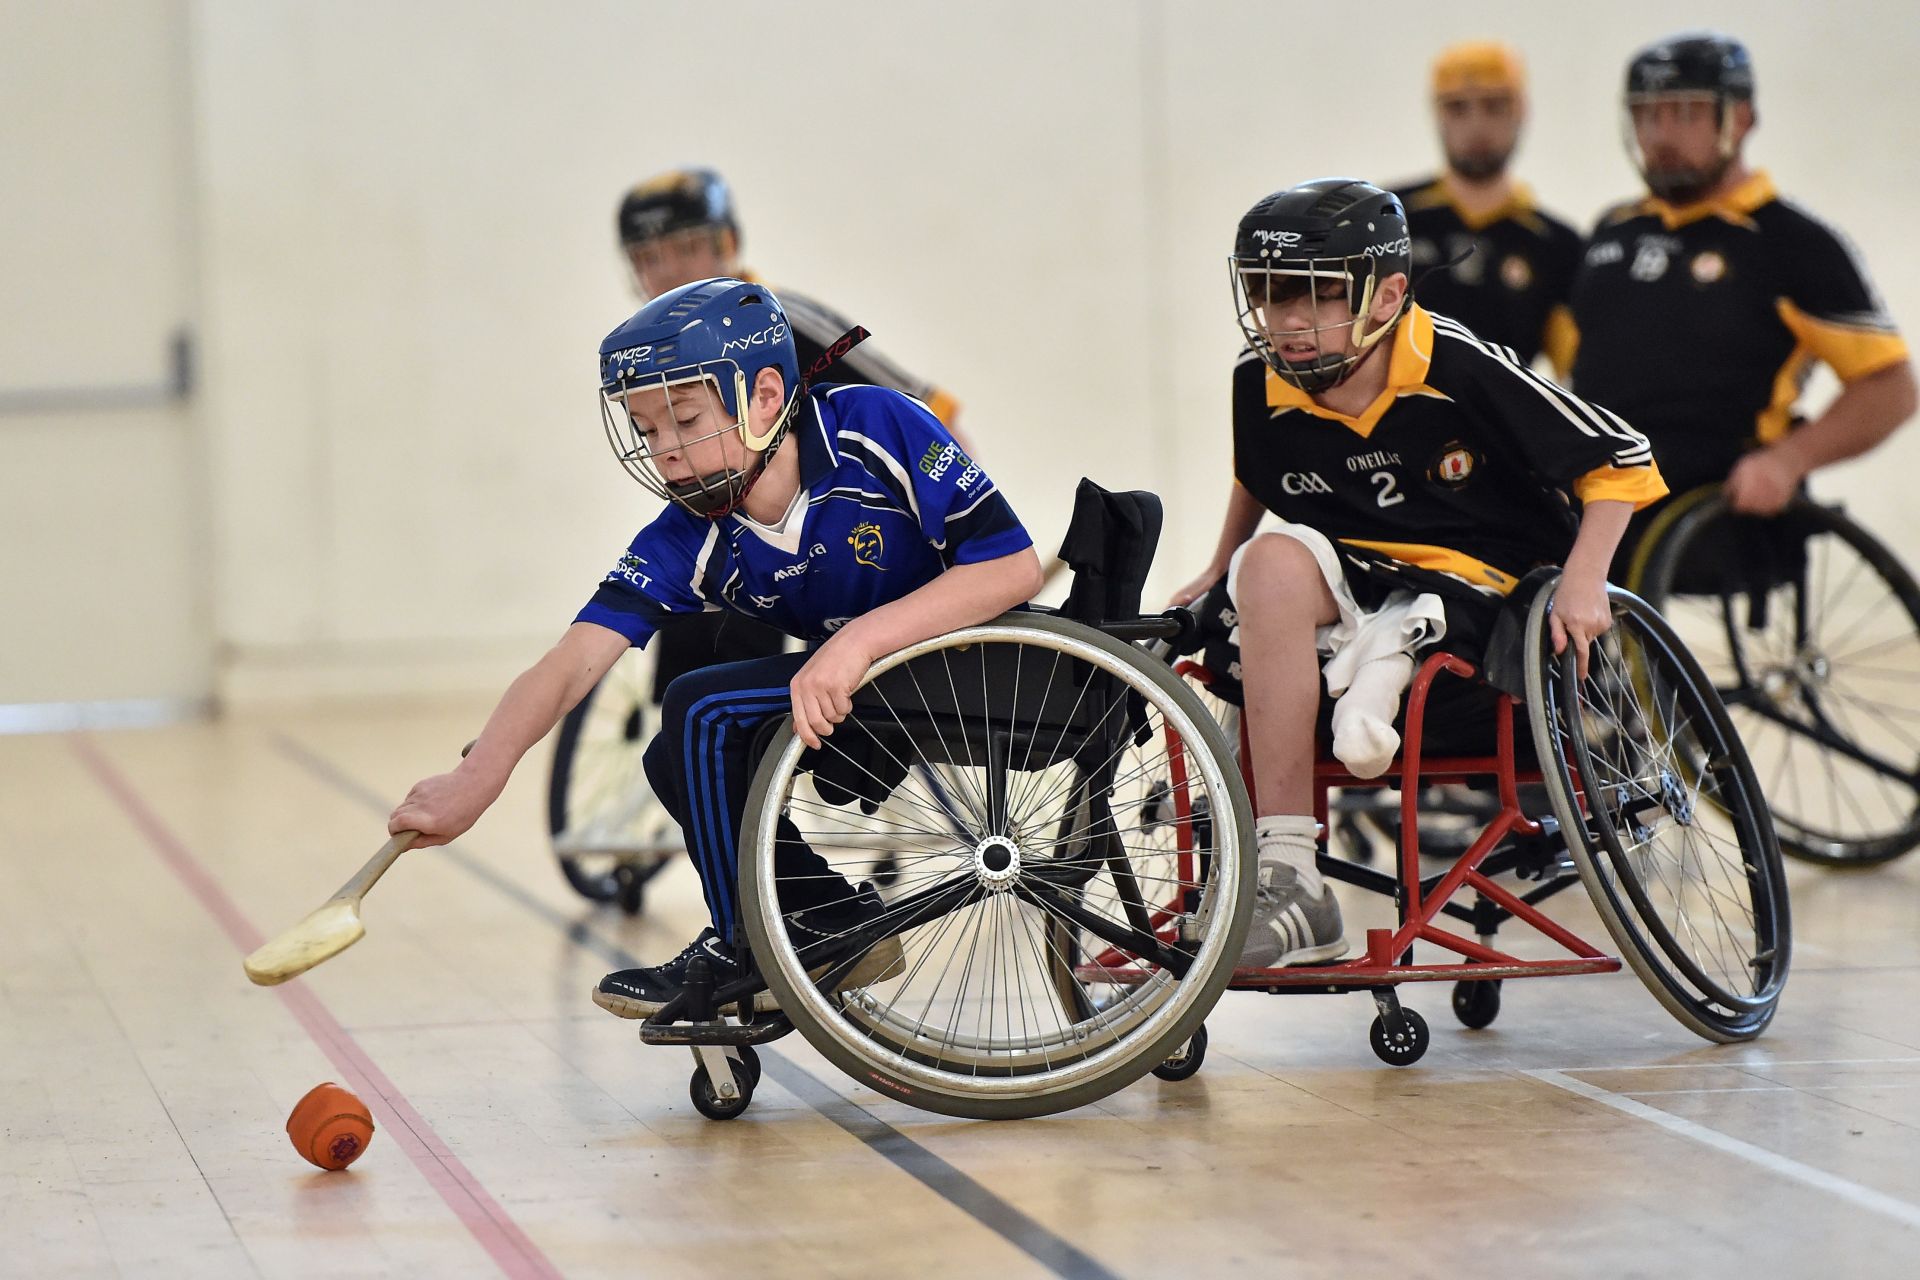 James McCarthy of Munster in action against Ruairi Haffey of Ulster during the M. Donnelly GAA Wheelchair Hurling Finals